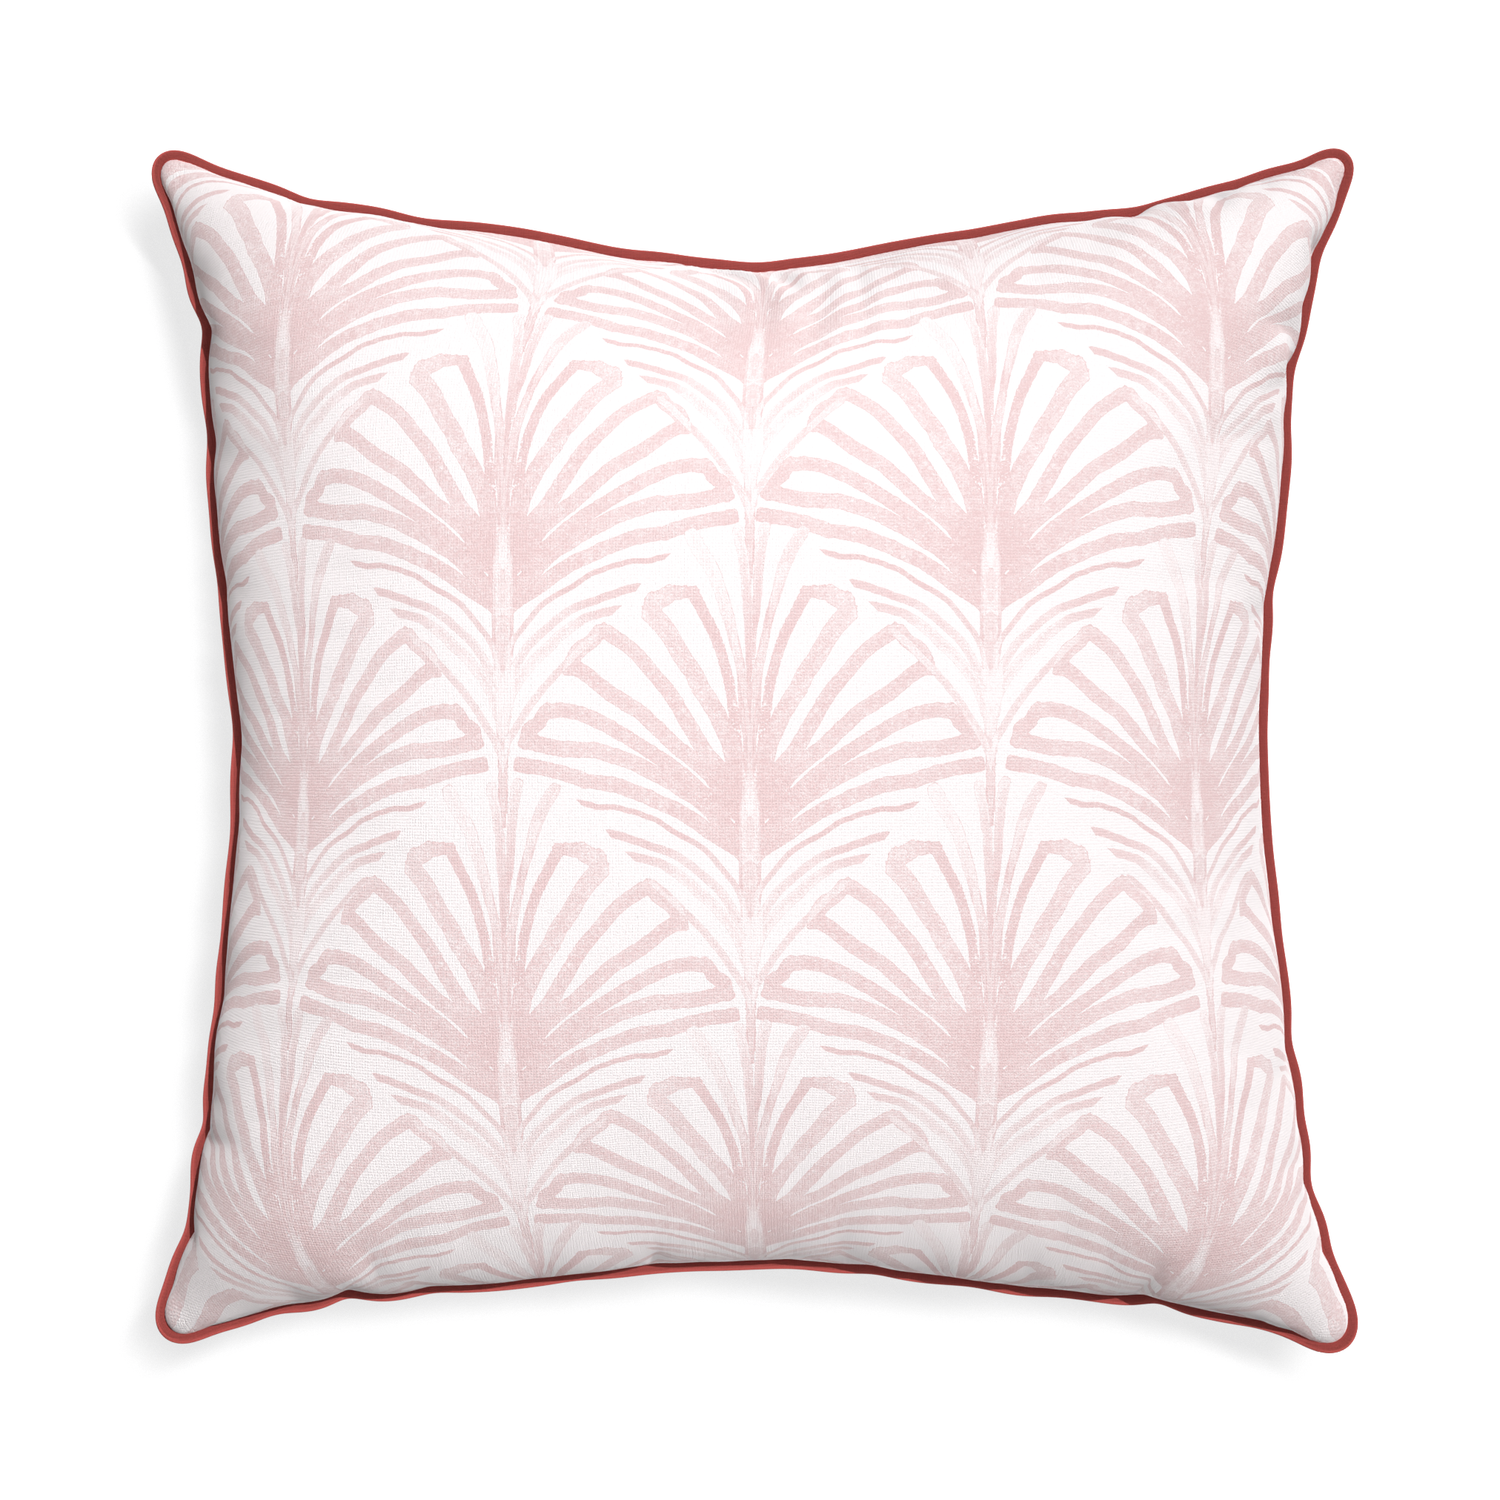 Euro-sham suzy rose custom pillow with c piping on white background